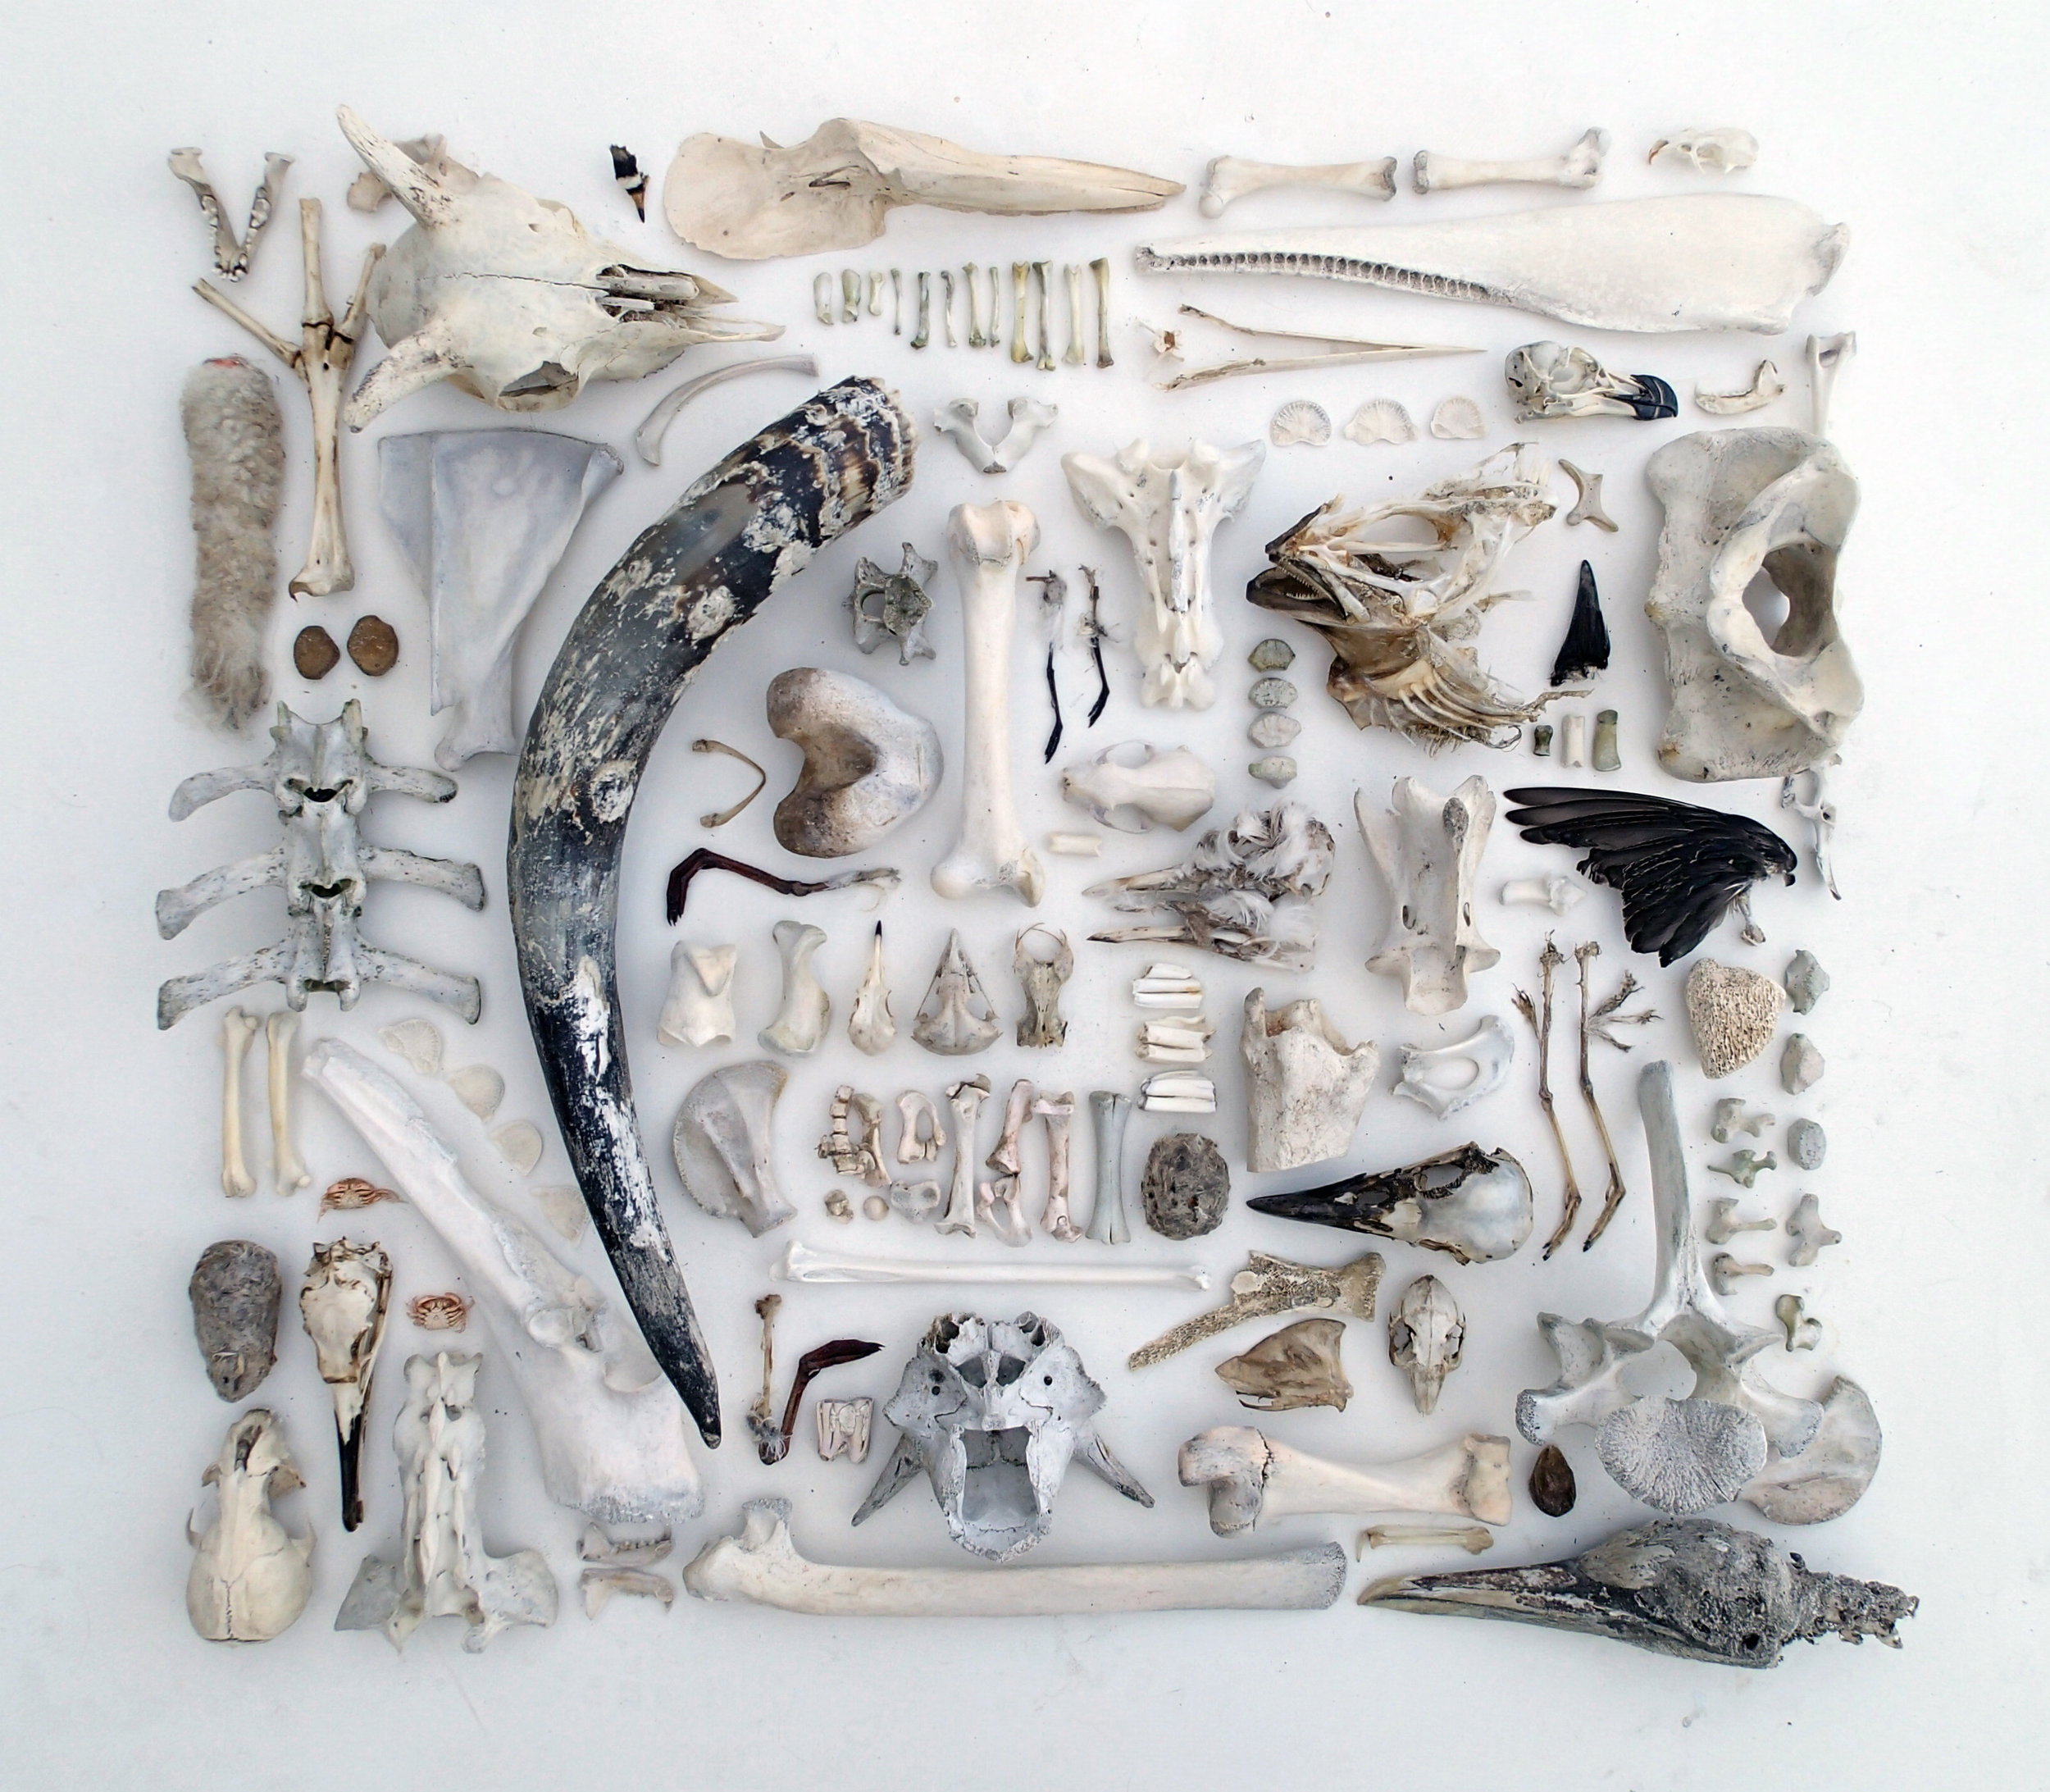  As We Are Now (iii)  Mixed faunal remains, 100 x 100cms, 2014 